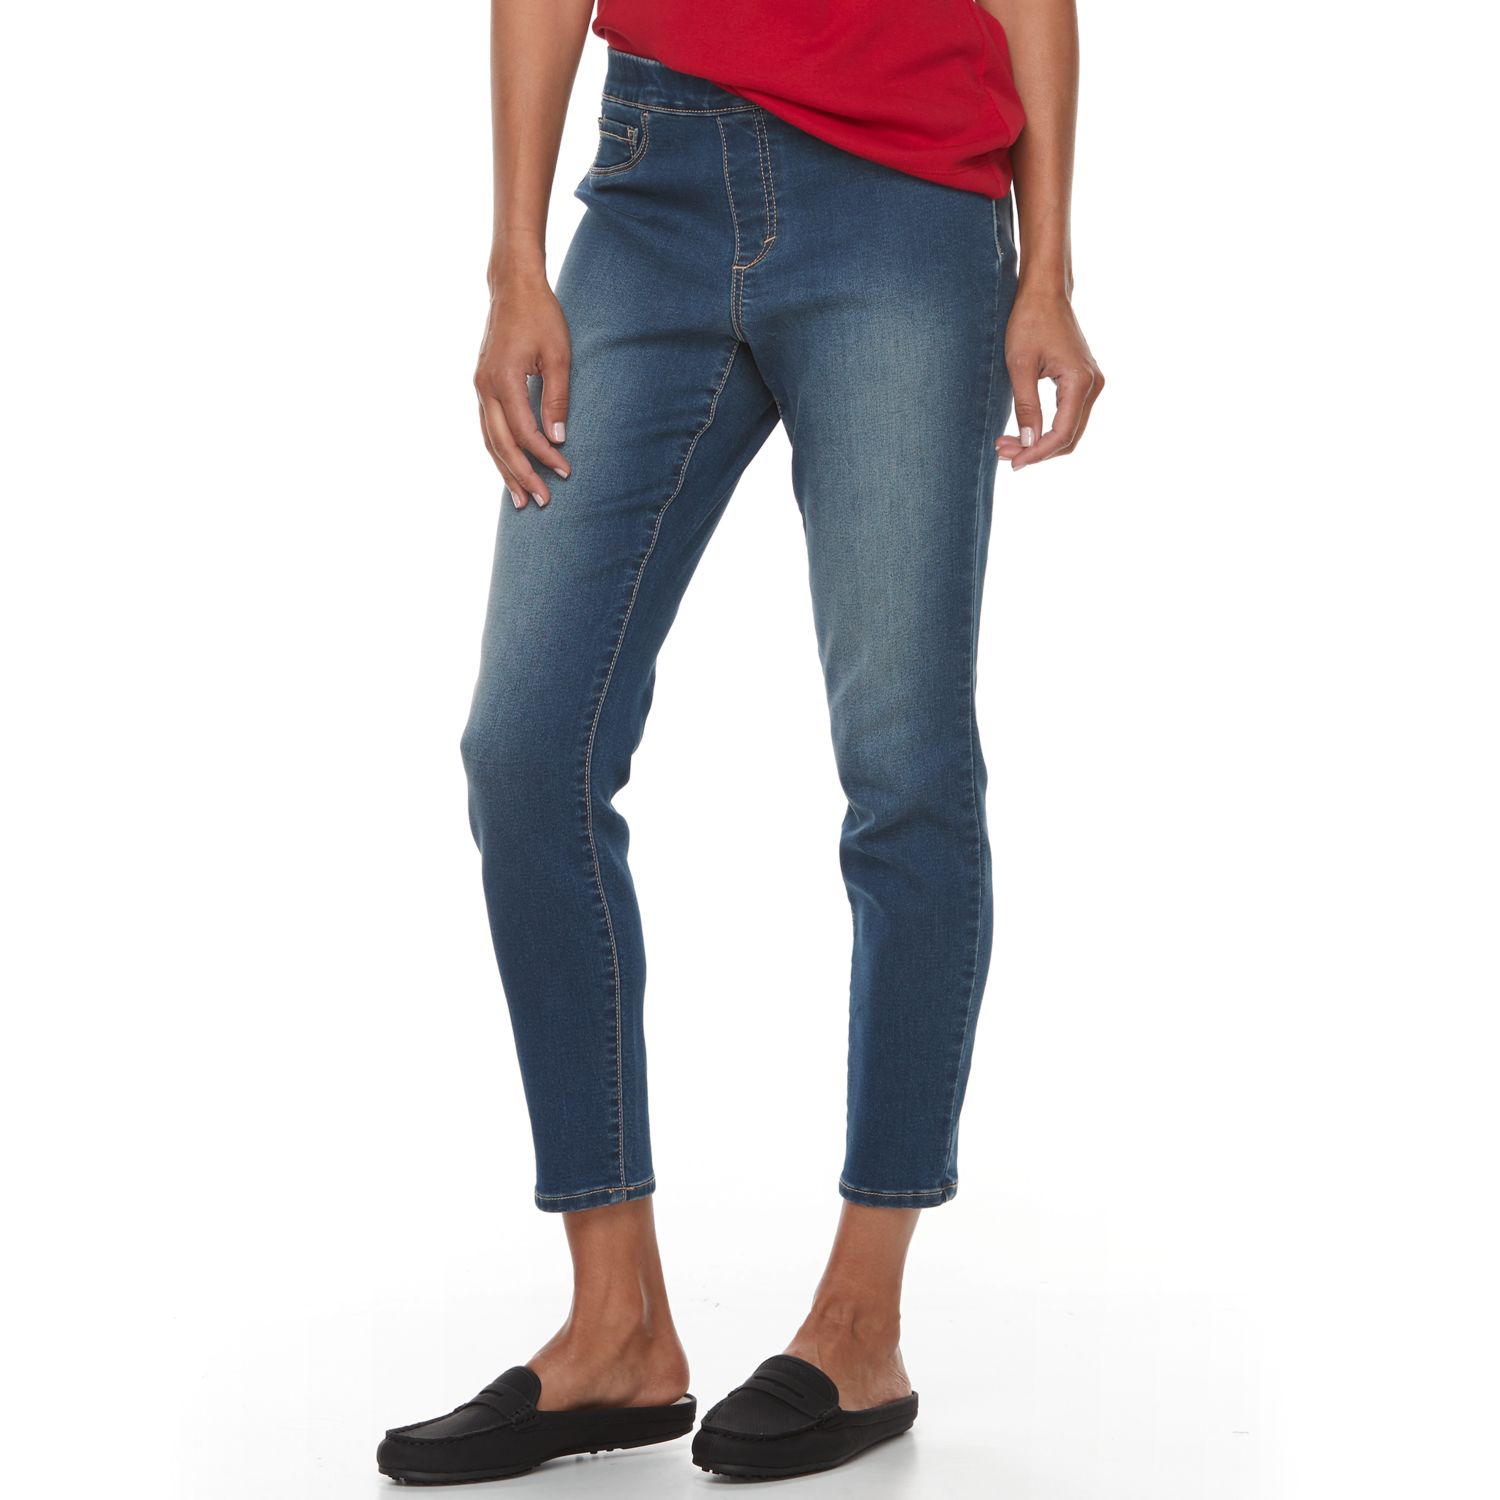 croft and barrow ladies jeans